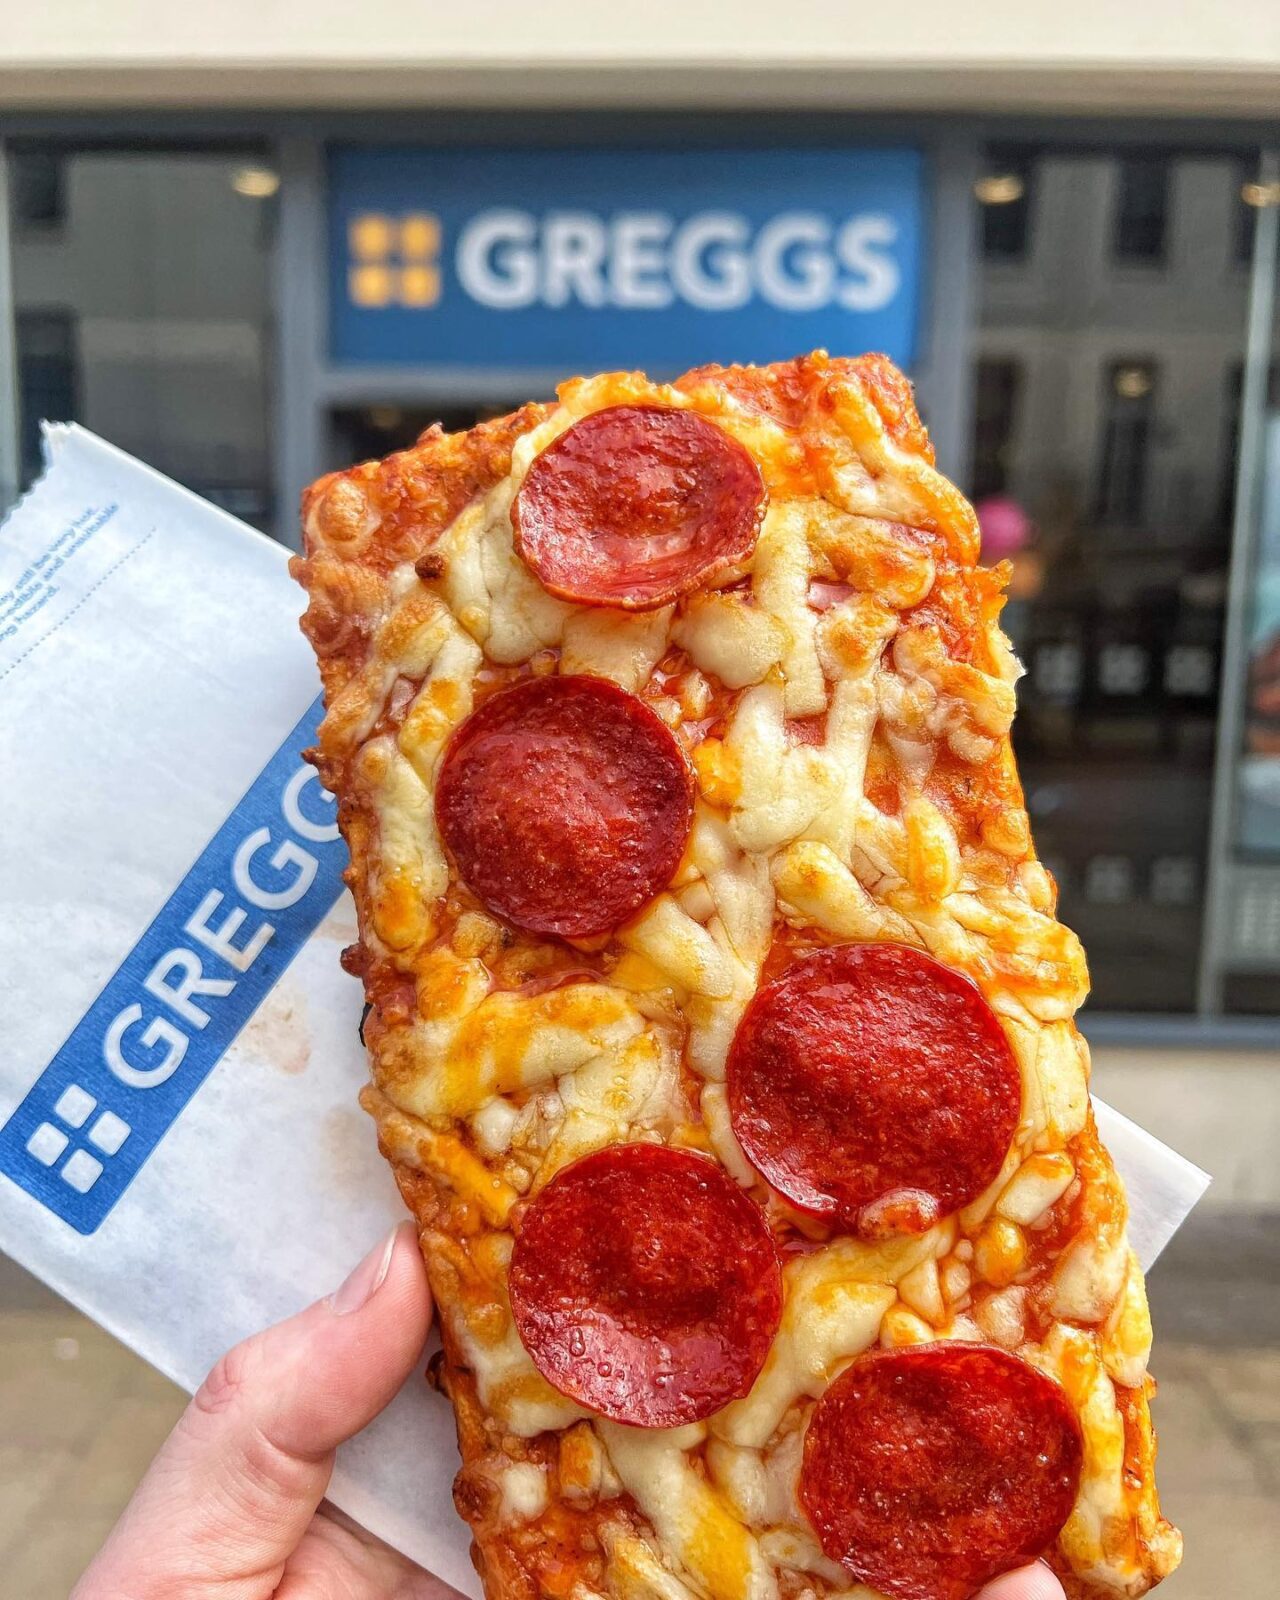 A massive Greggs megastore is coming to Greater Manchester, The Manc